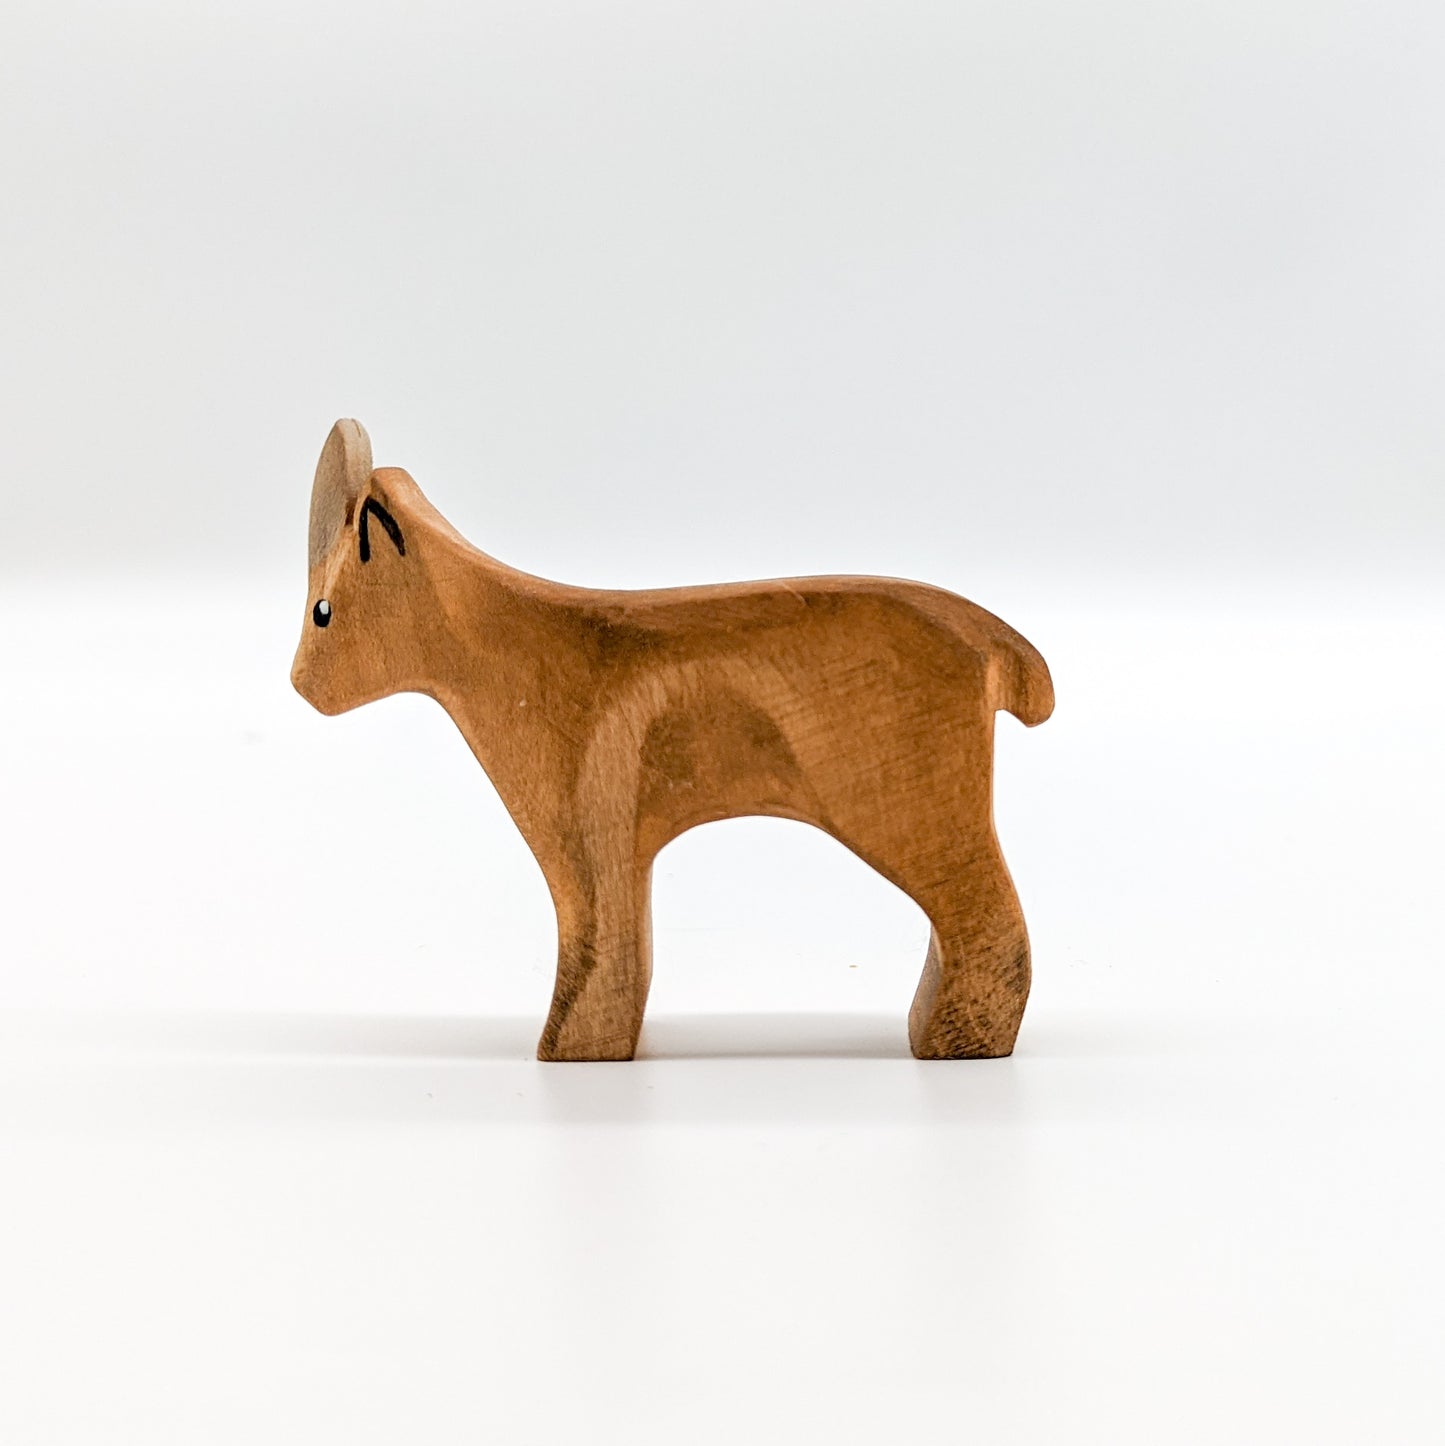 Goat Wooden Toy